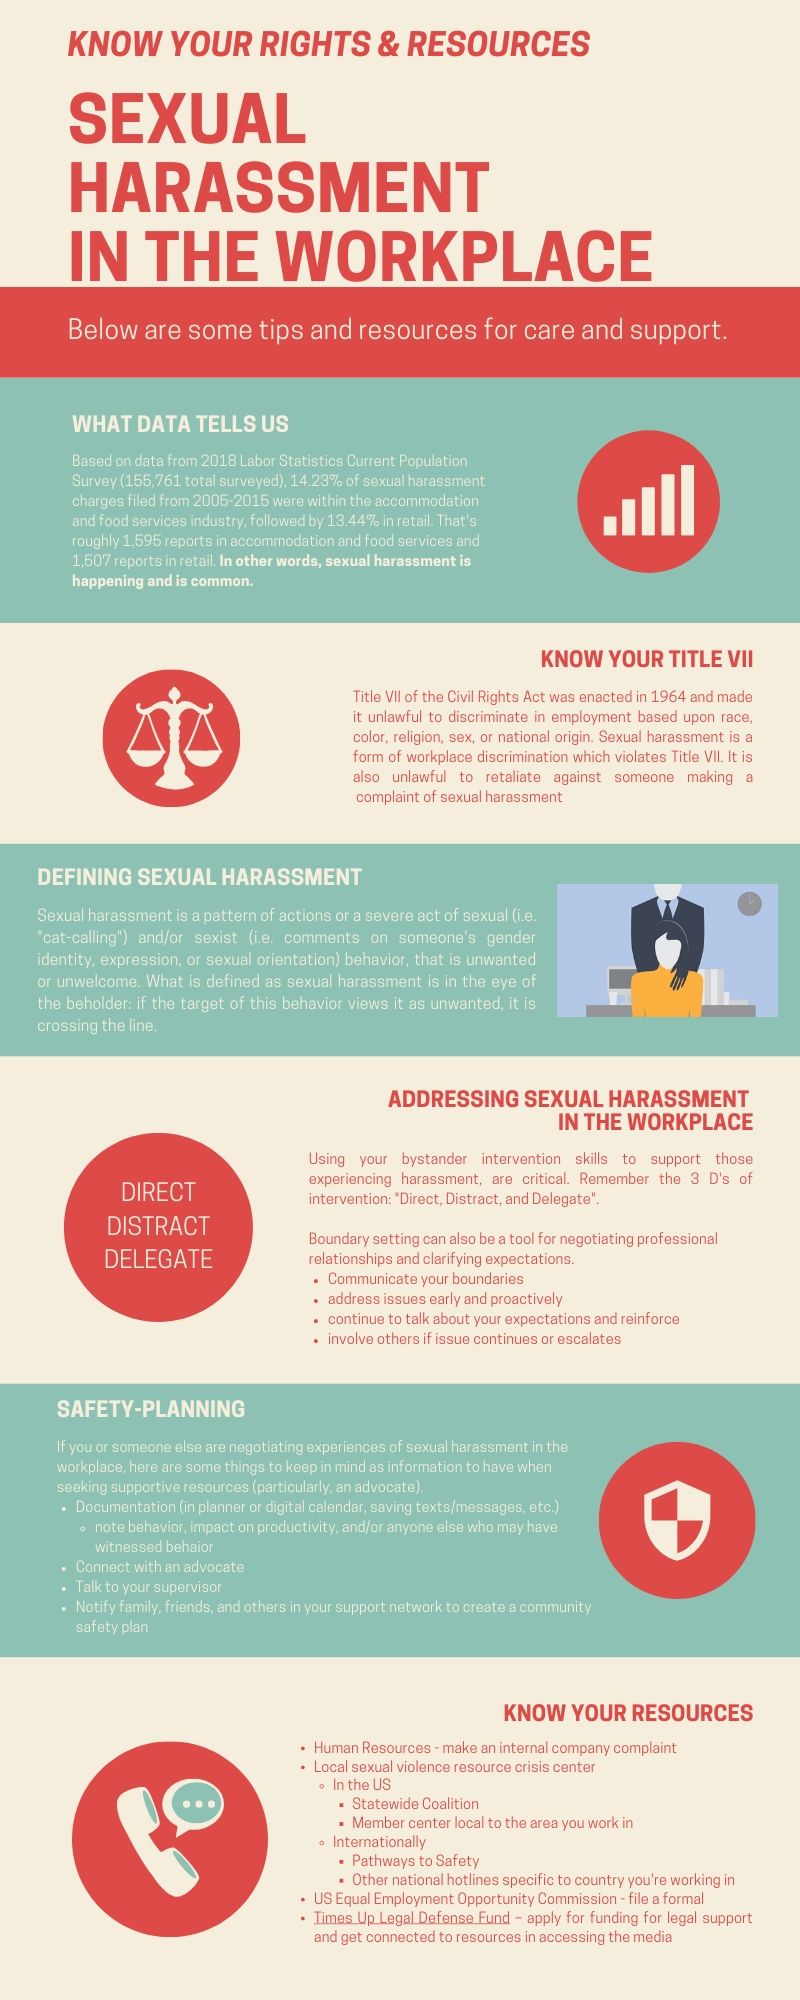 Image outlining resources for sexual harassment in the workplace